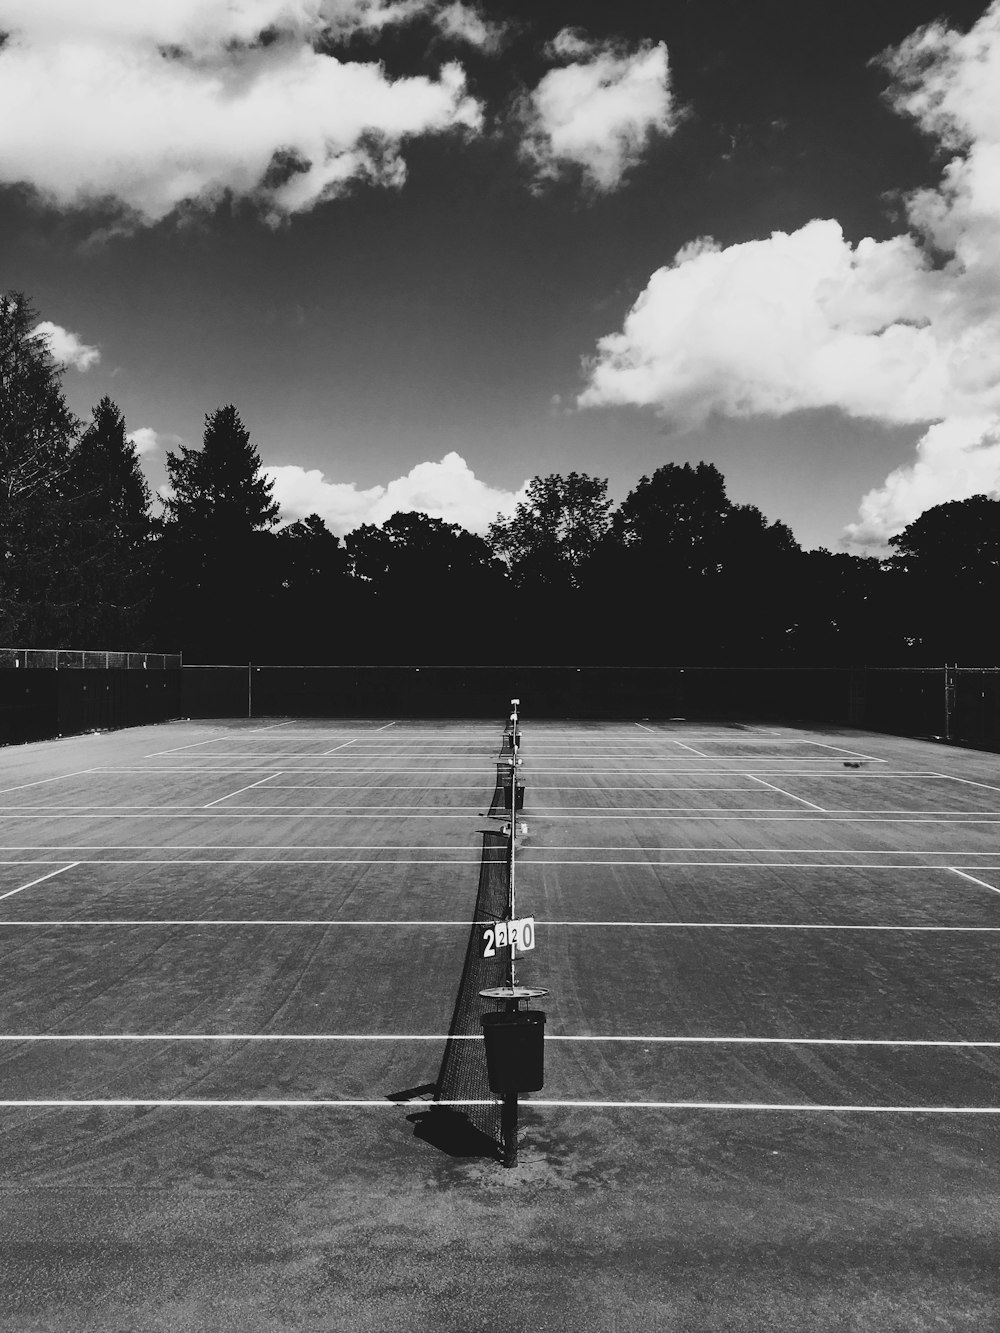 A look down the middle of a tennis net with a darkened background on a partially cloudy day.